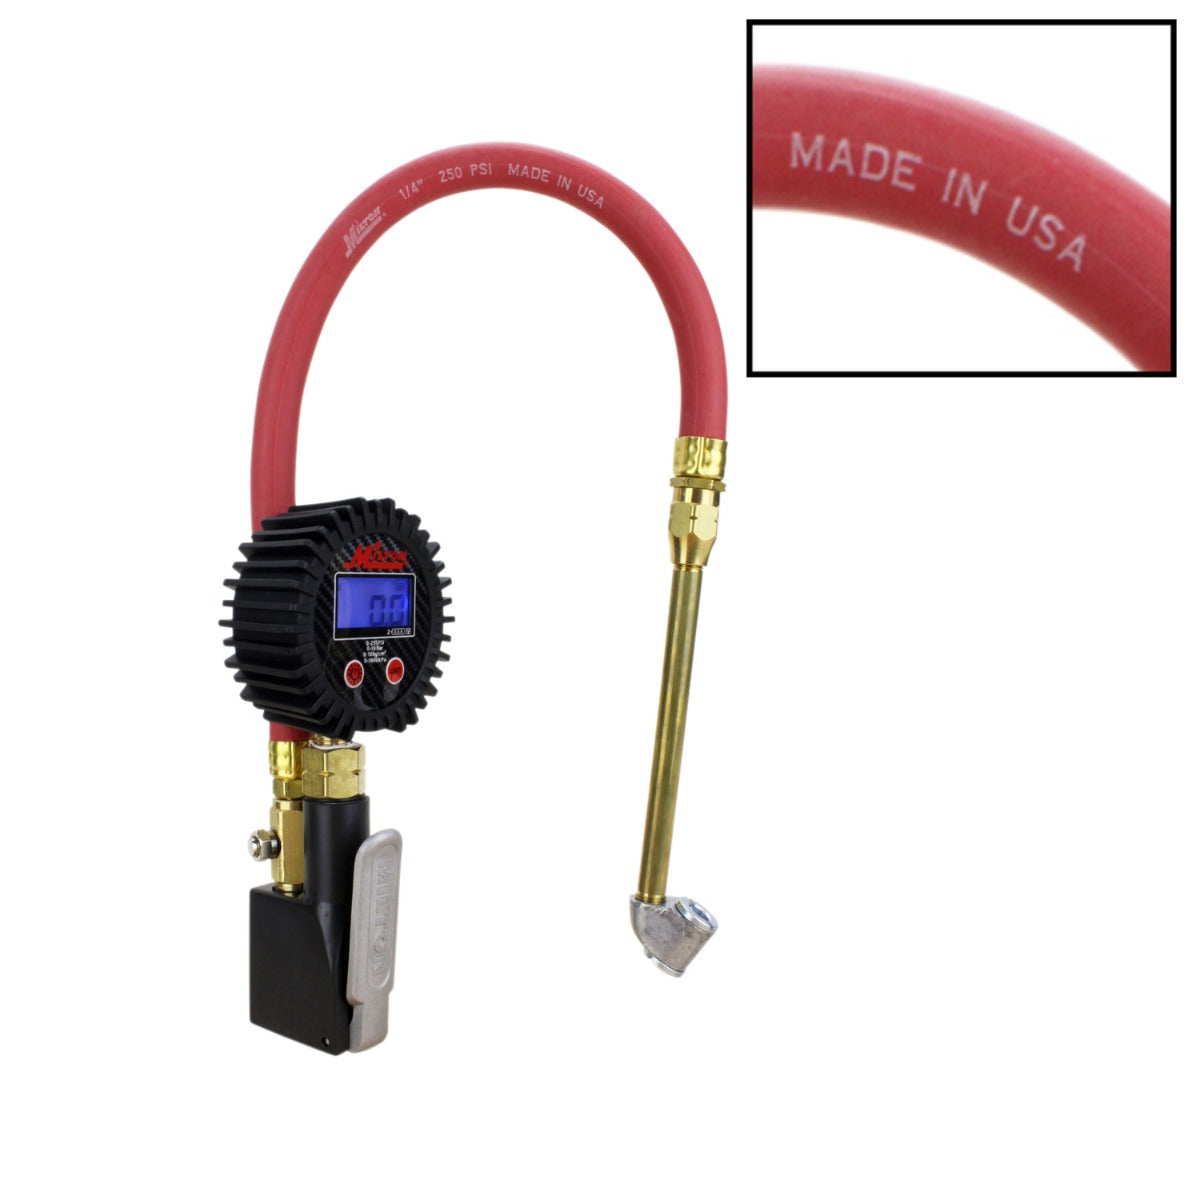 Compact Digital Tire Inflator with Pressure Gauge (255 PSI) - Air Chuck & 15